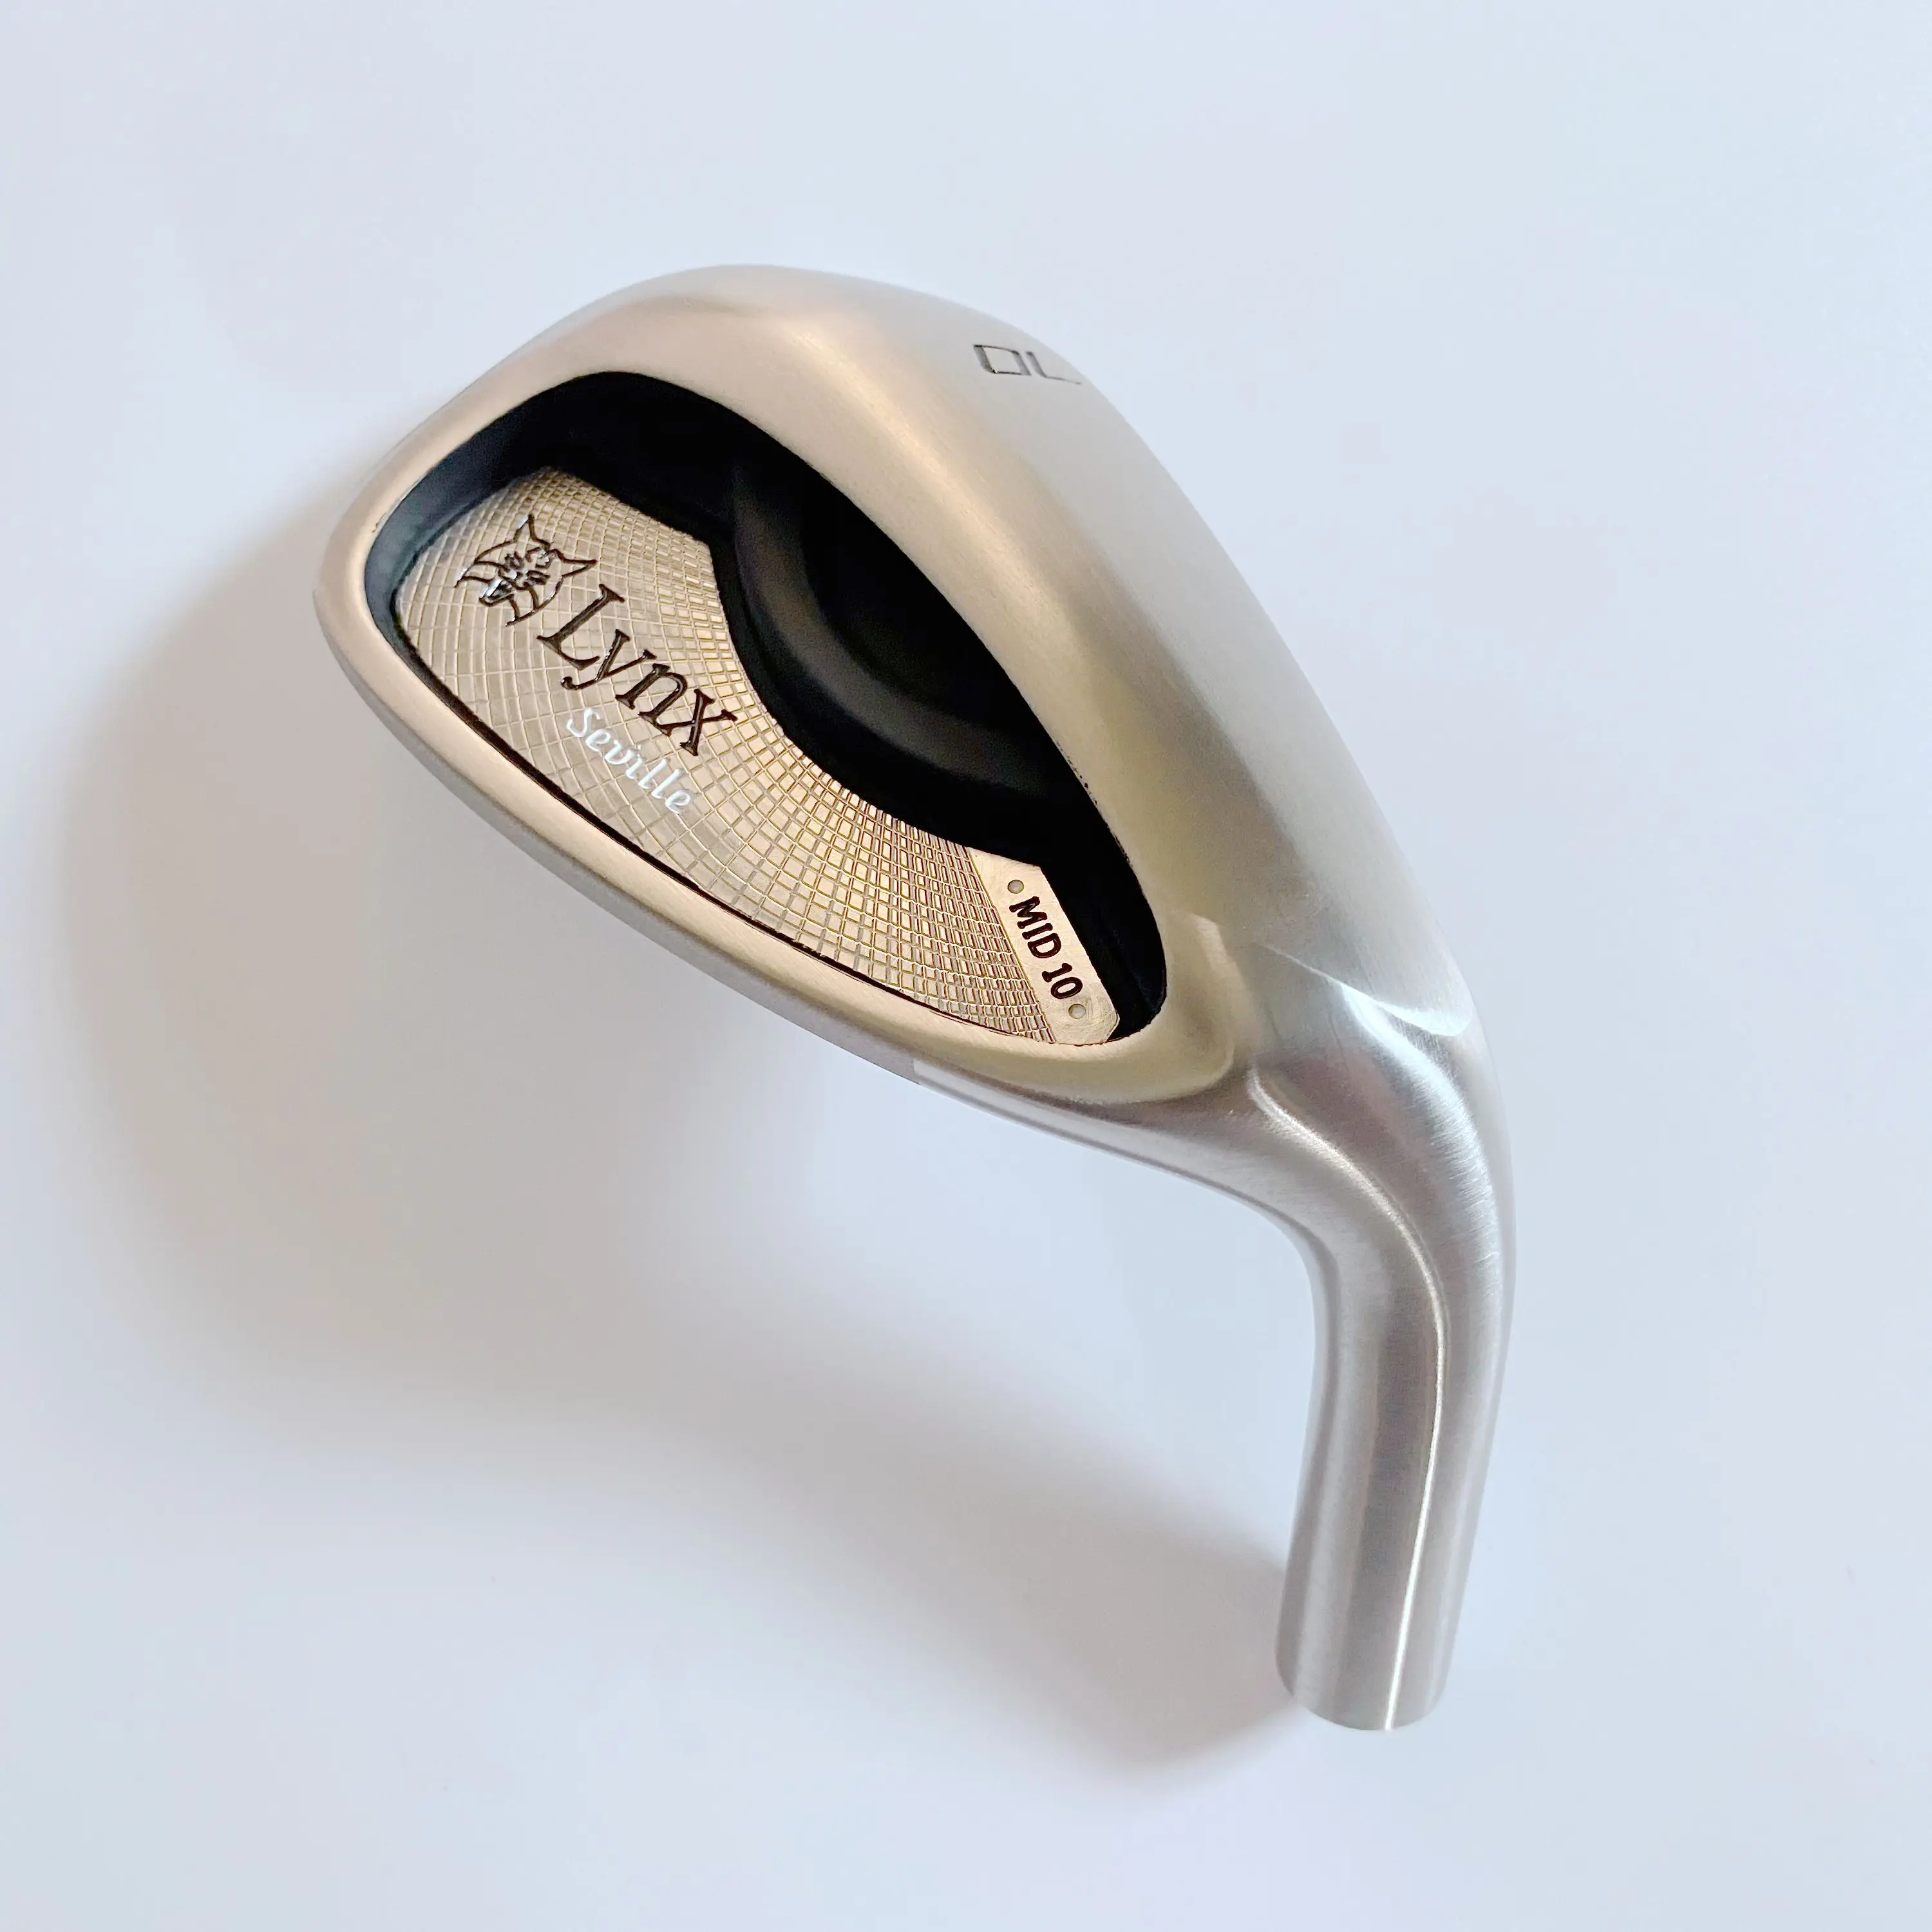 Yihome Golf Clubs Wedge Head Only  70 Degree Soft Iron Forged Free Shipping  No Shaft Special Price